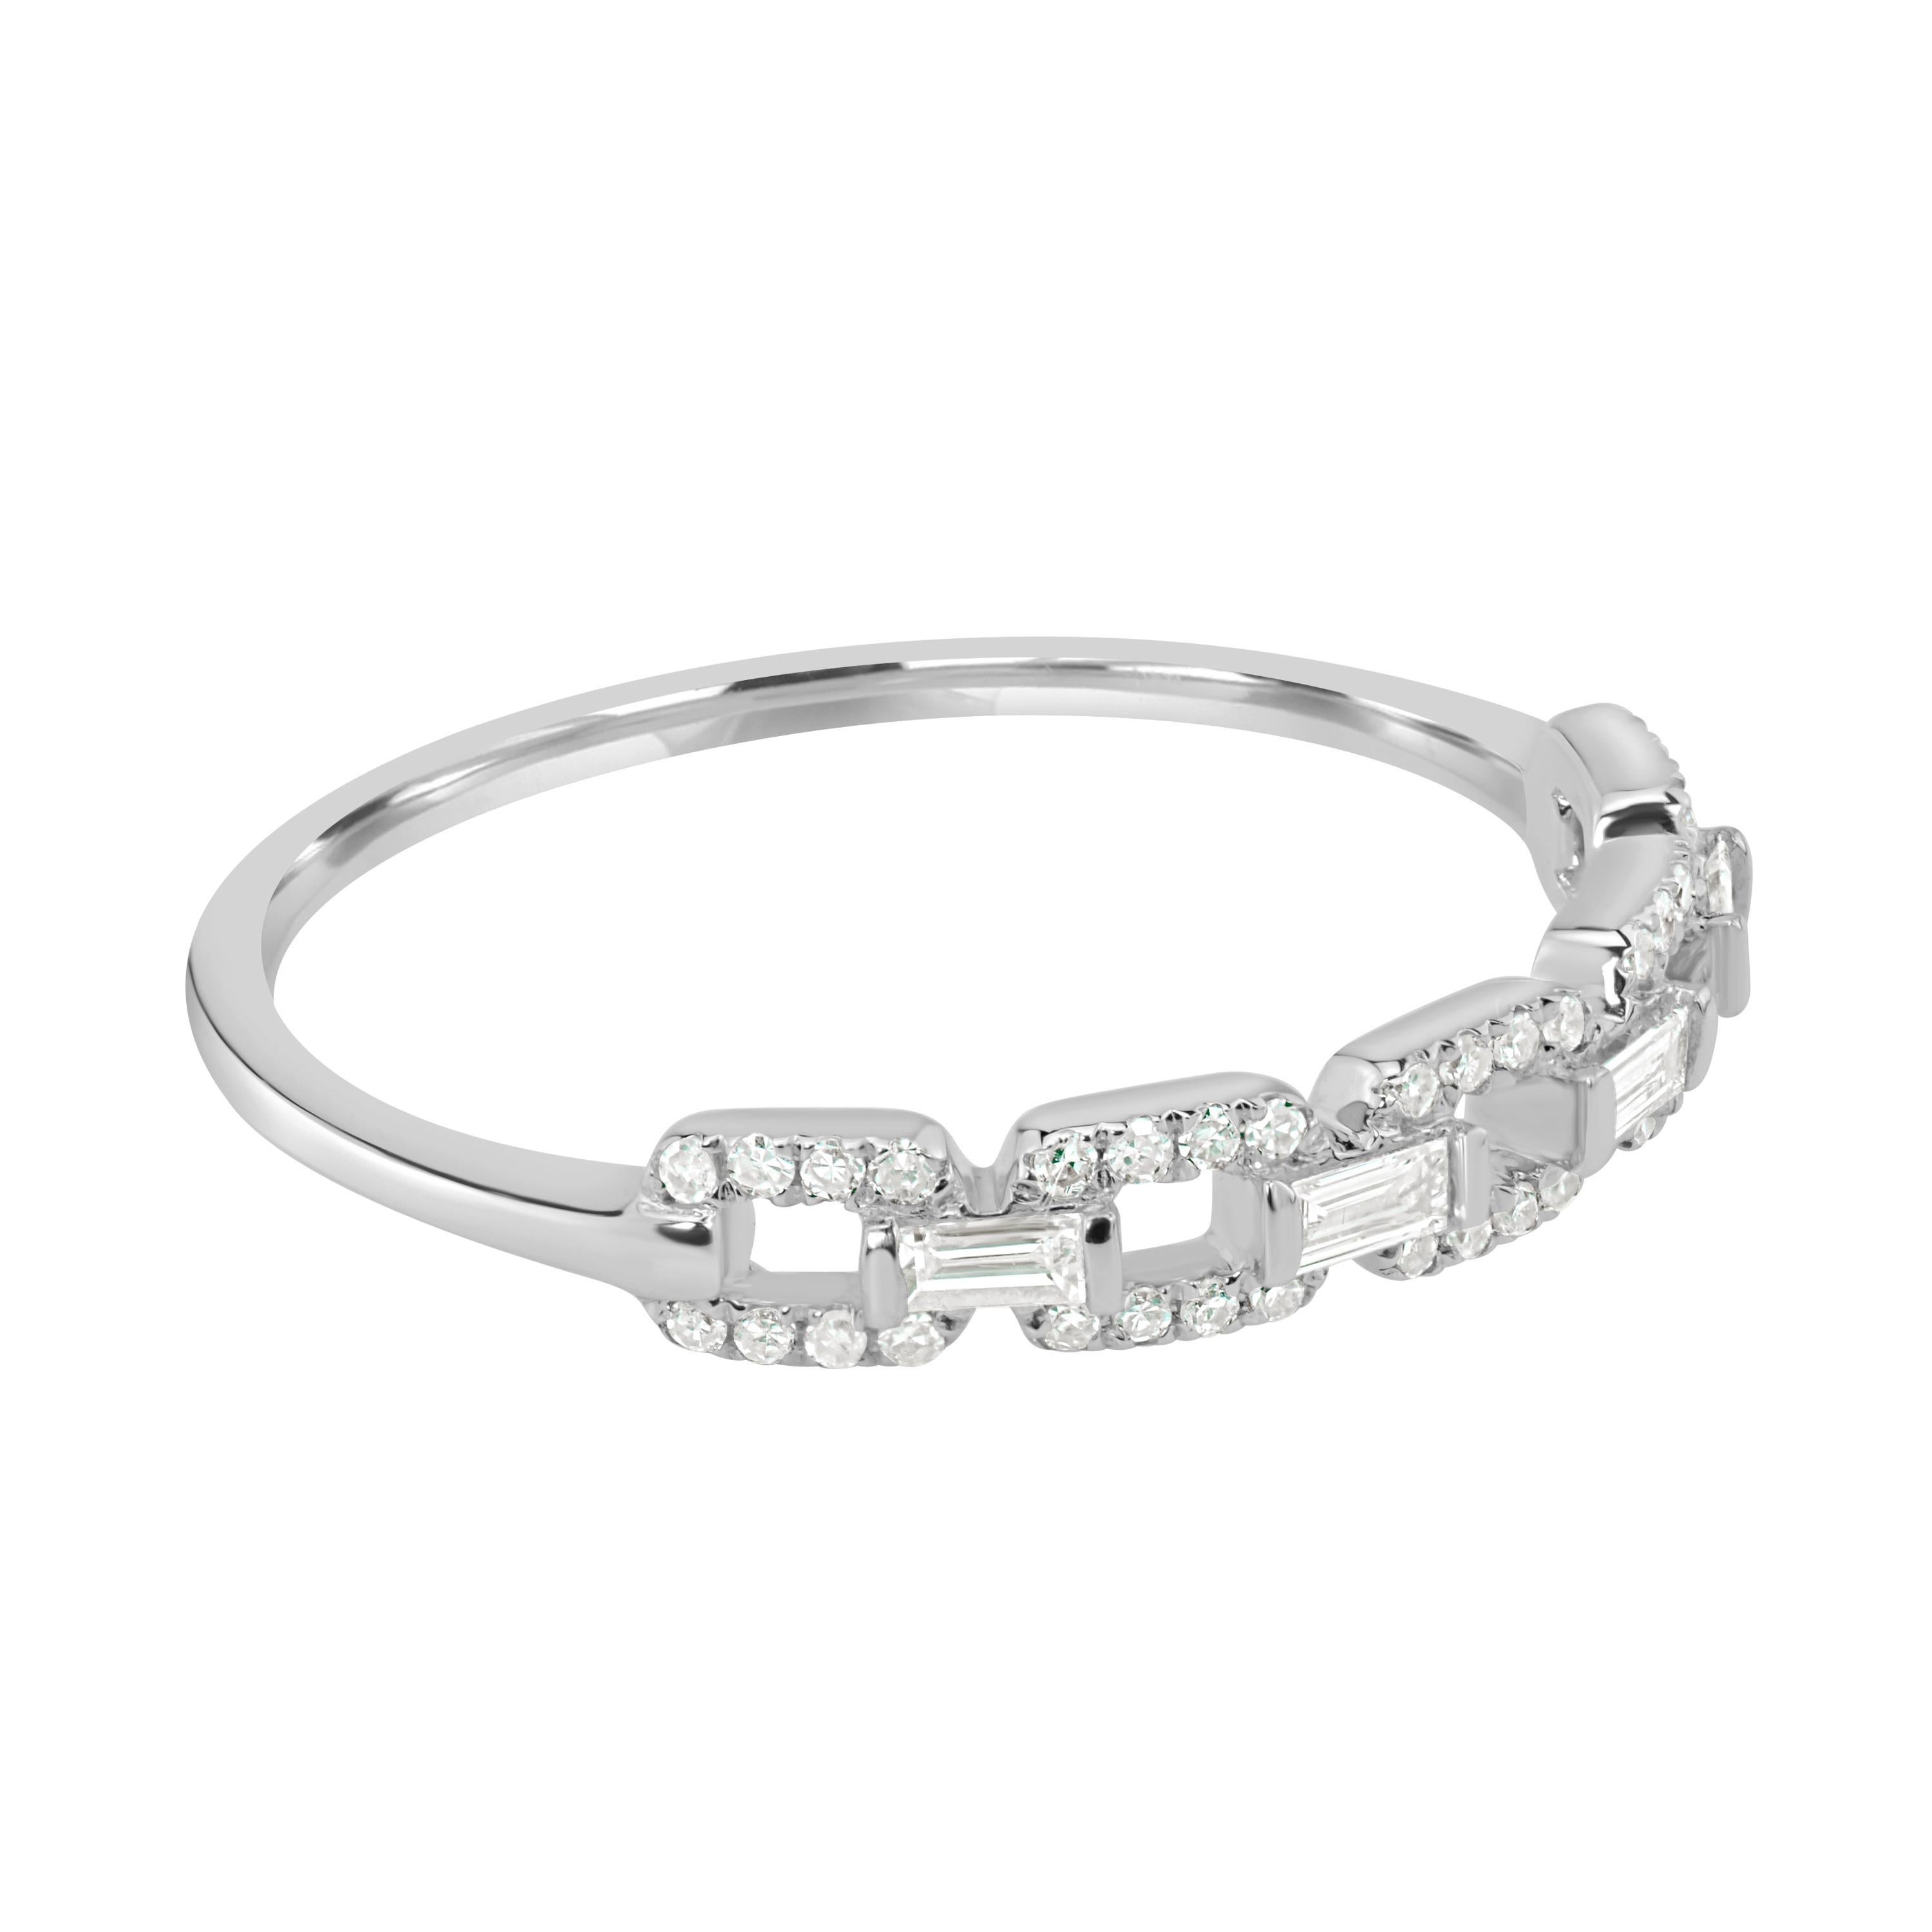 Luxle Round Pave Diamond Link Band Ring in 14k White Gold In New Condition For Sale In New York, NY